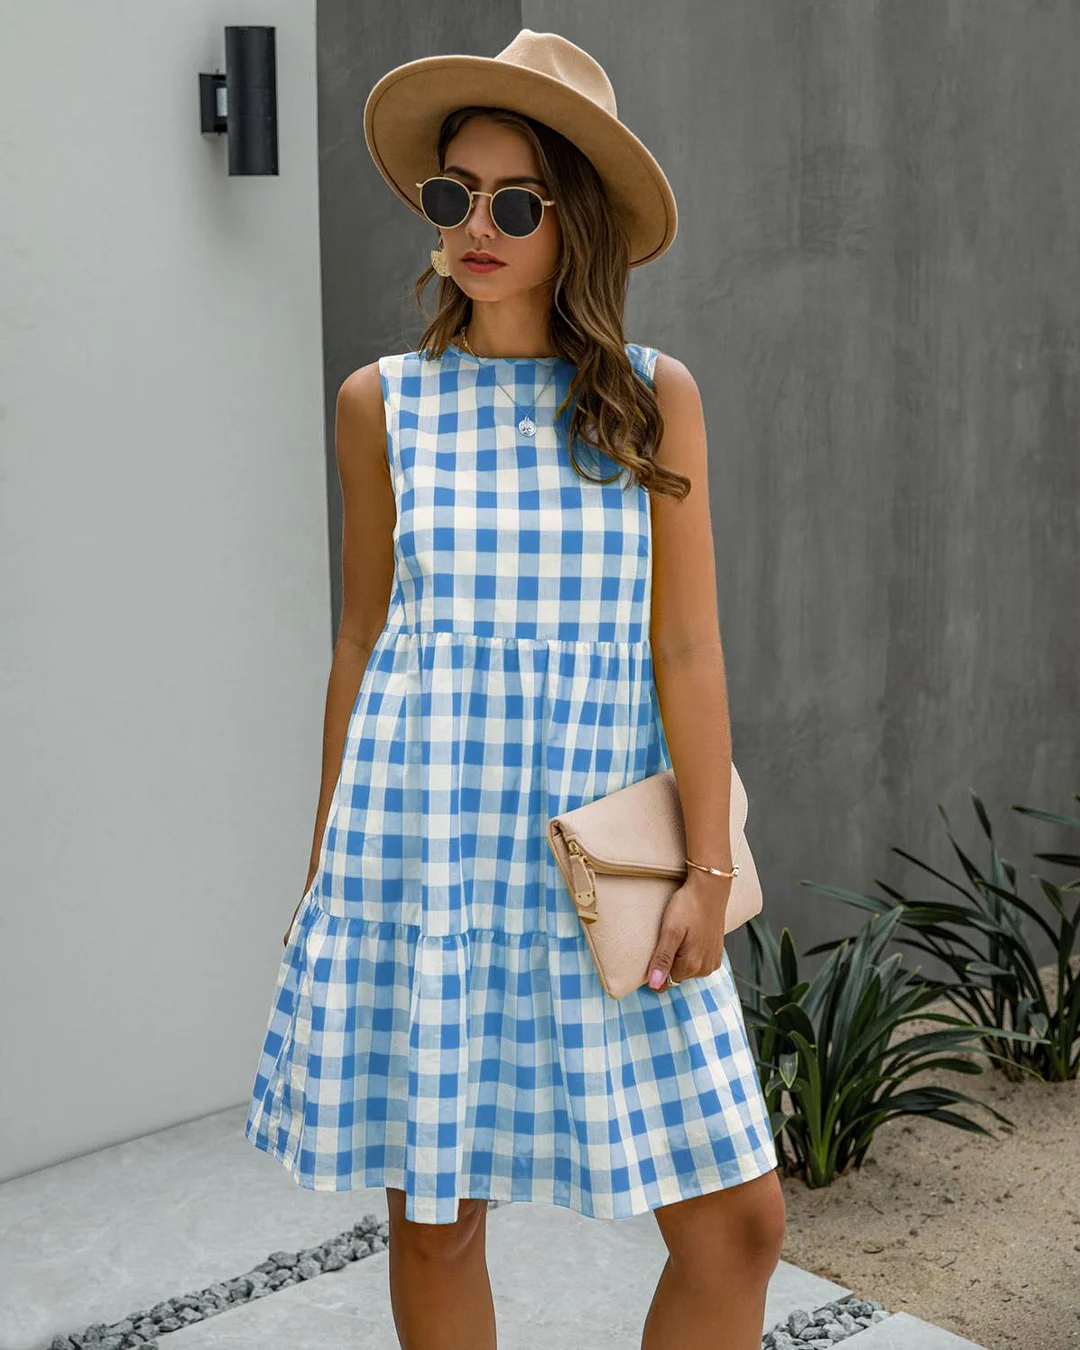 Plaid Dress Women Black A-line Sundresses Pockets Summer Causal Blue Loose Fit Clothing Free People Red Clothes For Women